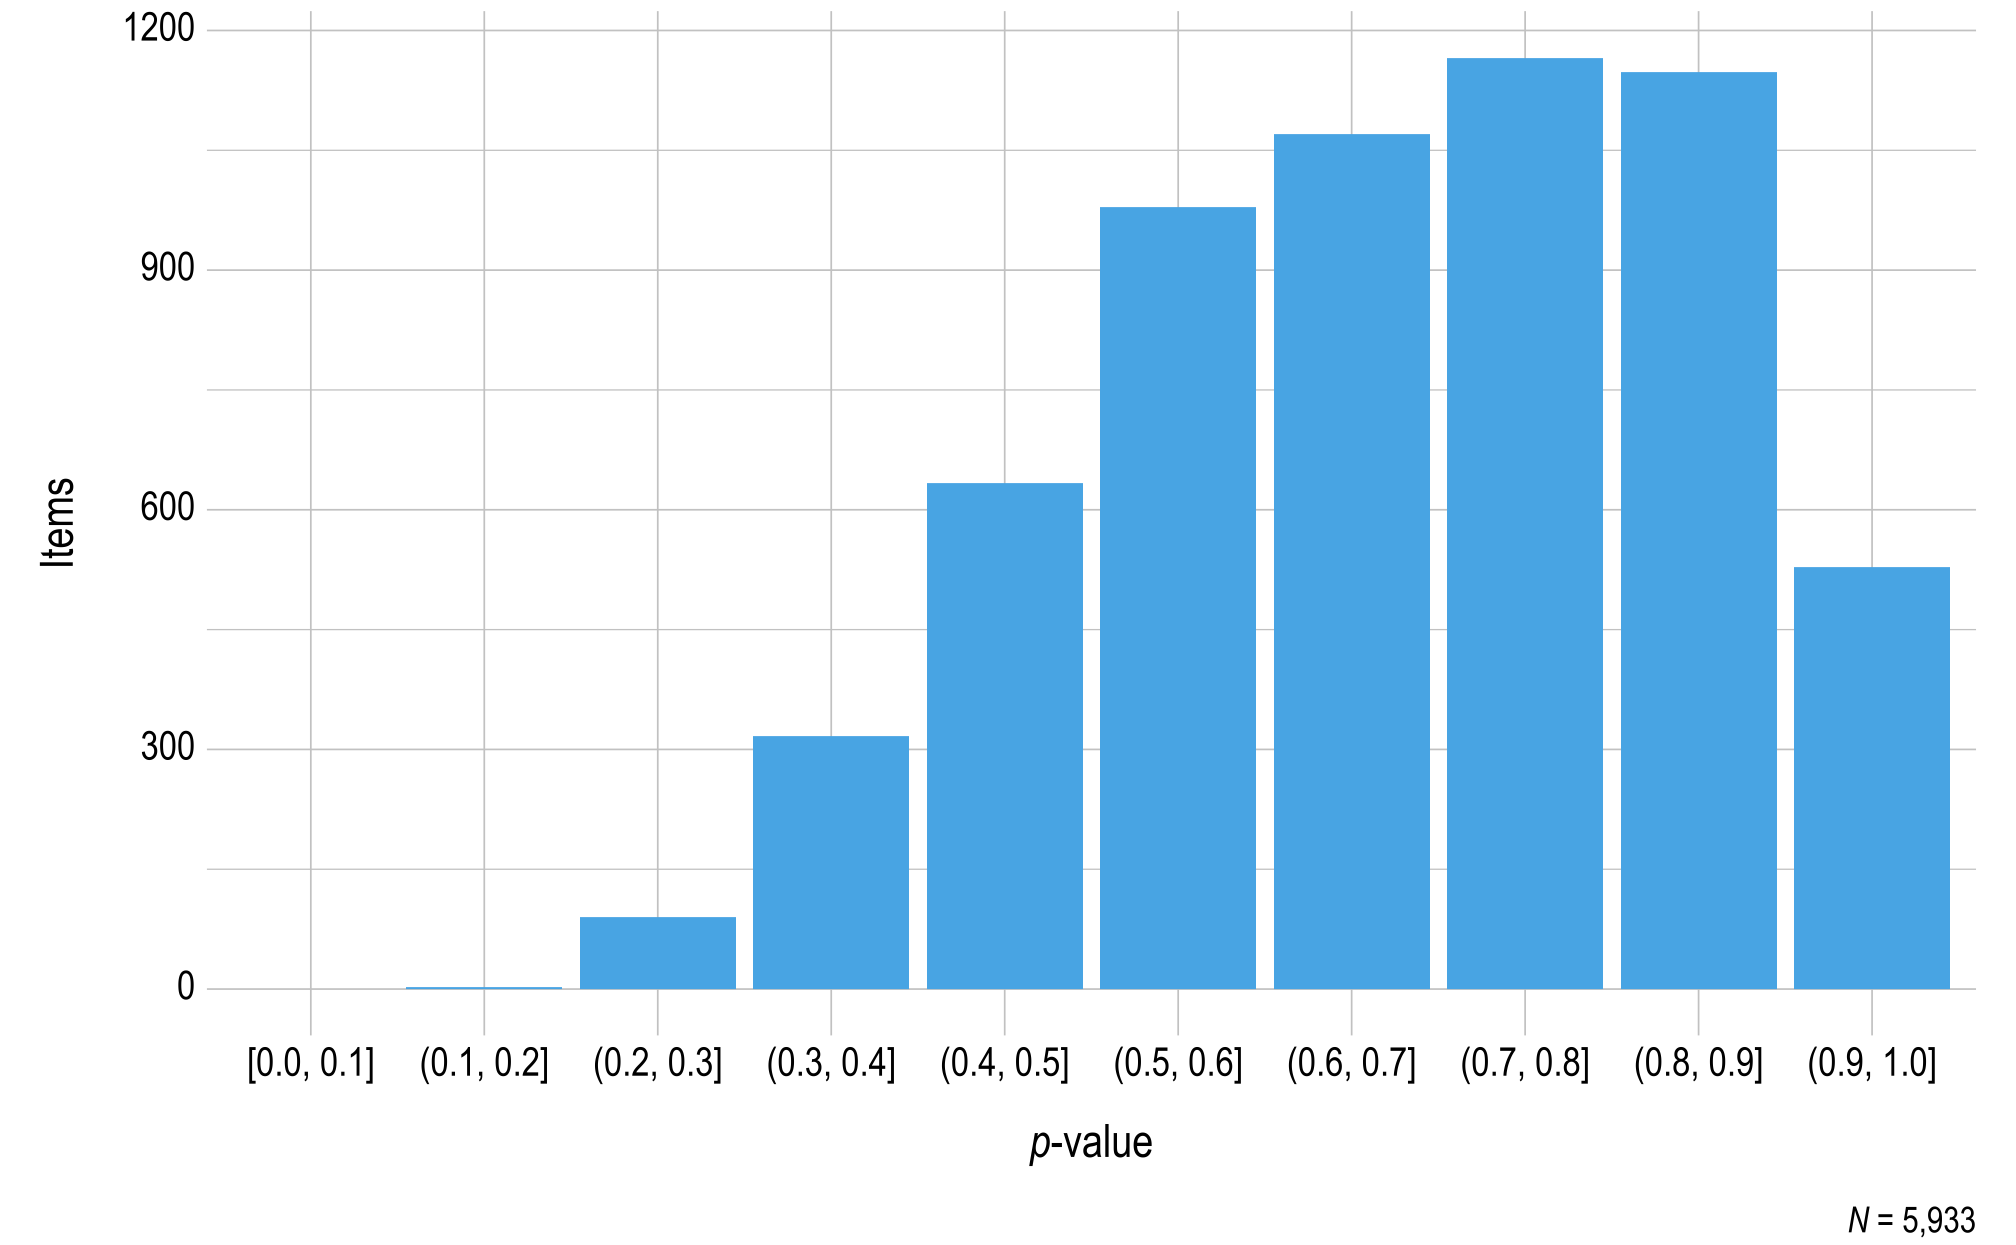 A histogram displaying p-value on the x-axis and the number of English language arts operational items on the y-axis.